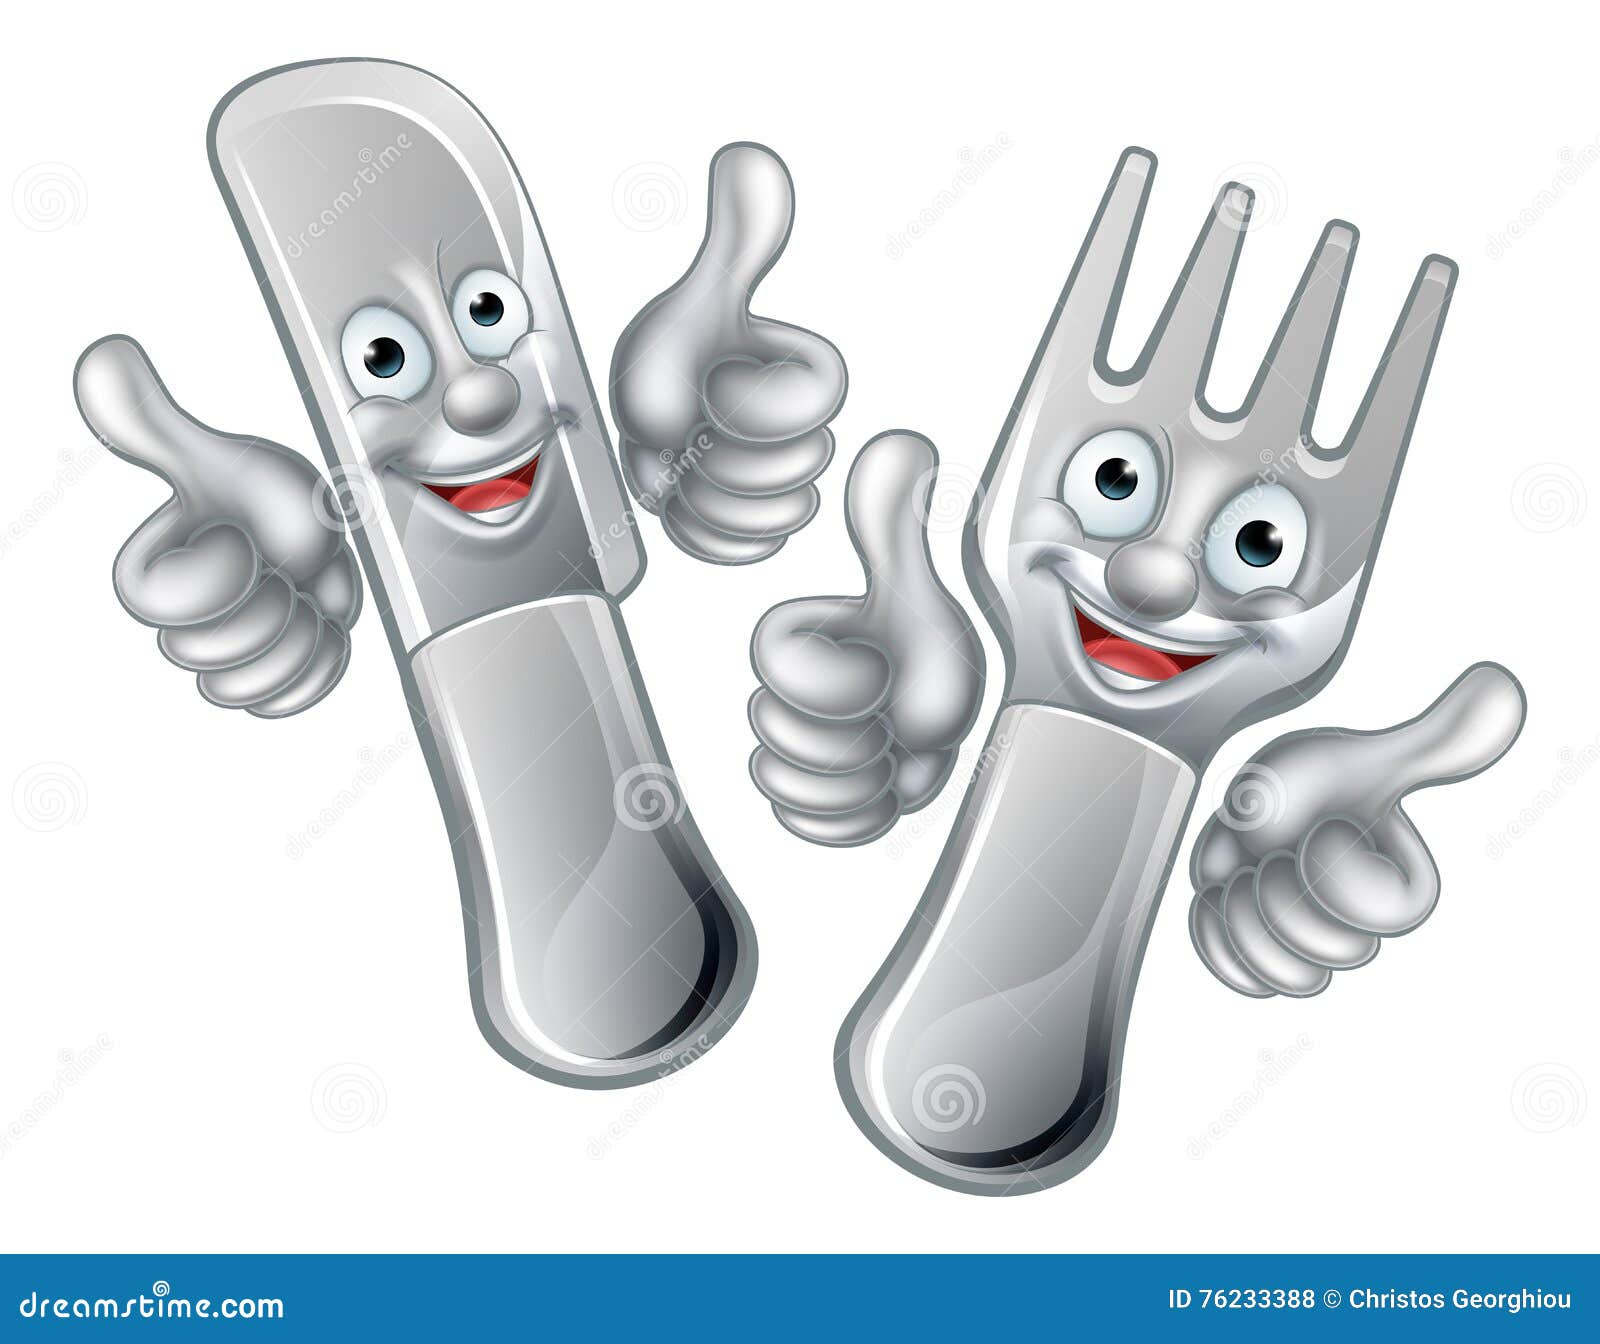 cartoon knife and fork cutlery mascots